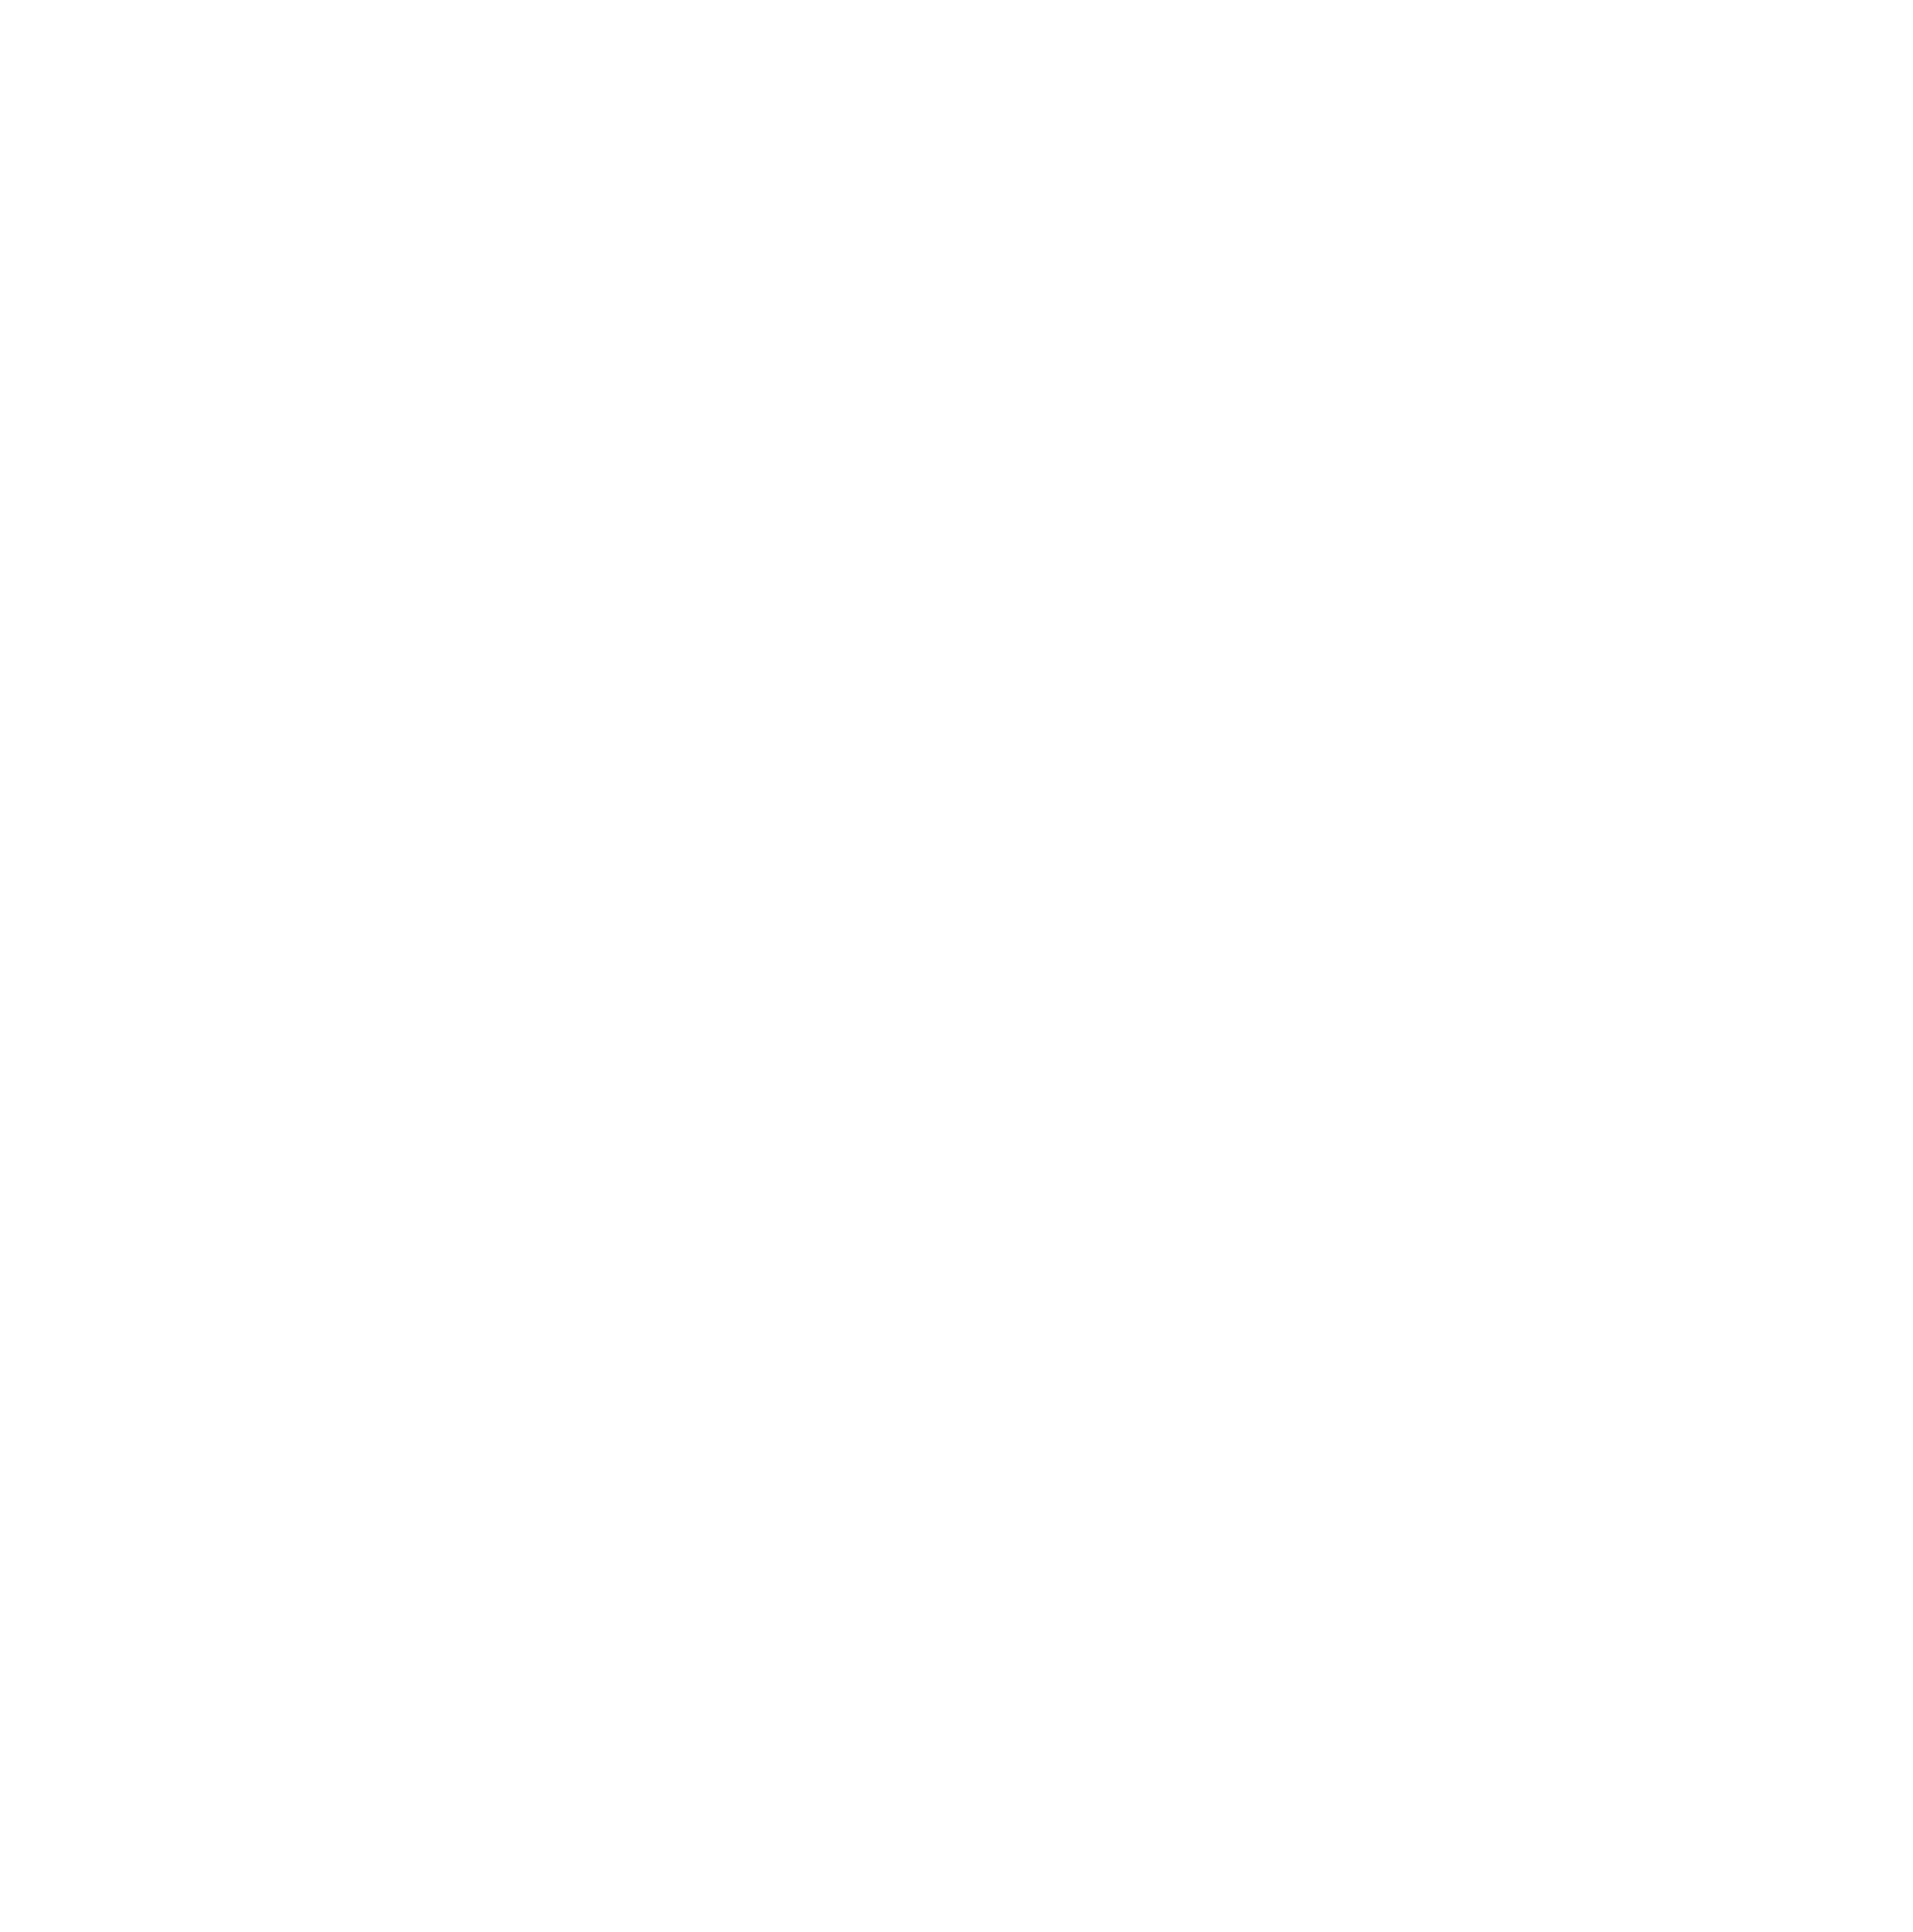 Assisted Living Investment - Invest in Assisted Living with LPC